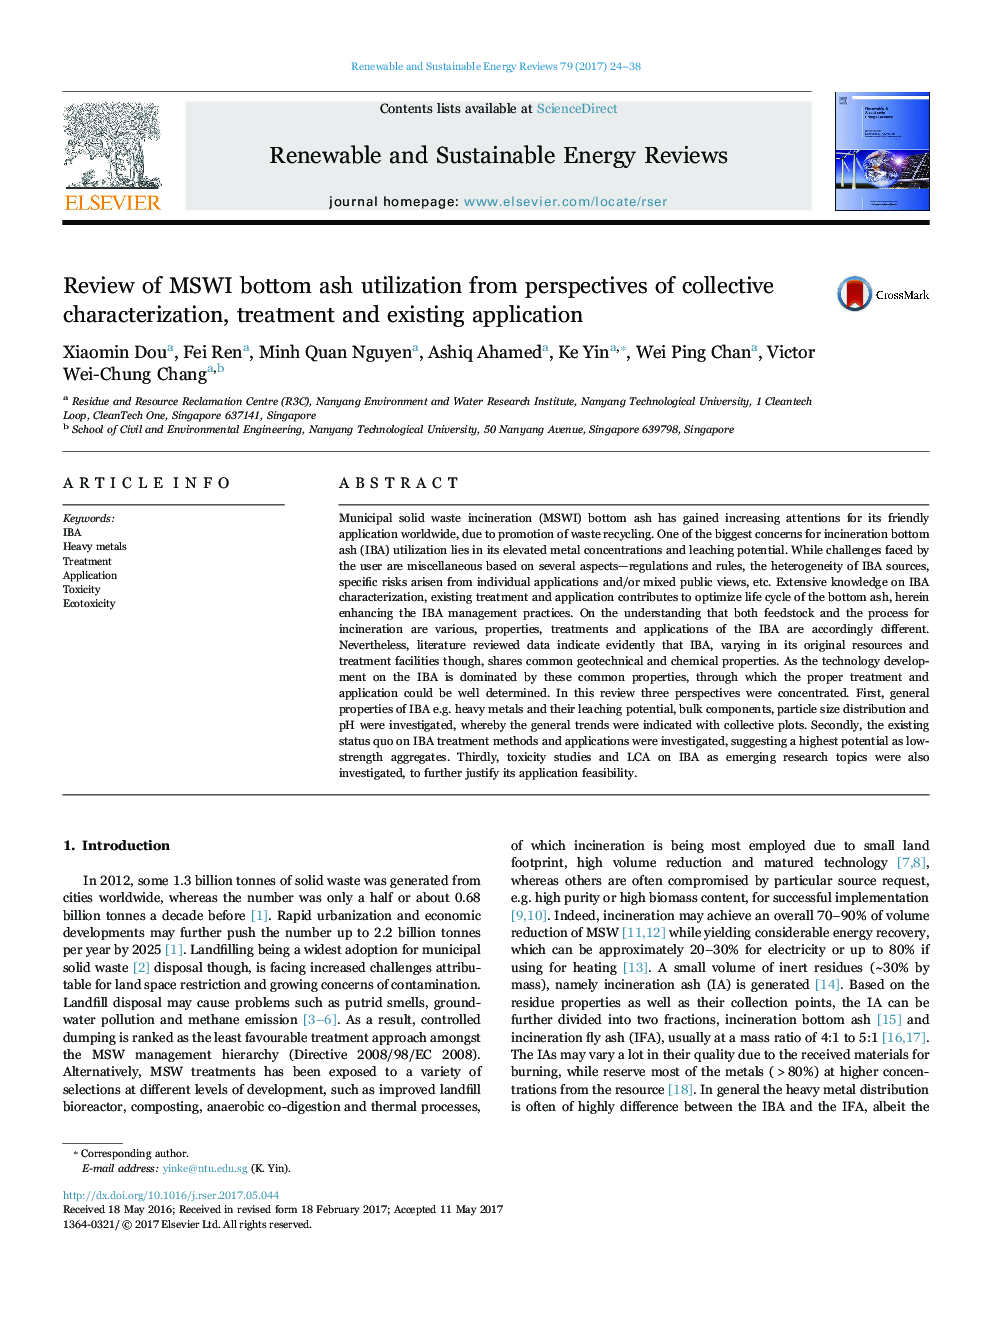 Review of MSWI bottom ash utilization from perspectives of collective characterization, treatment and existing application